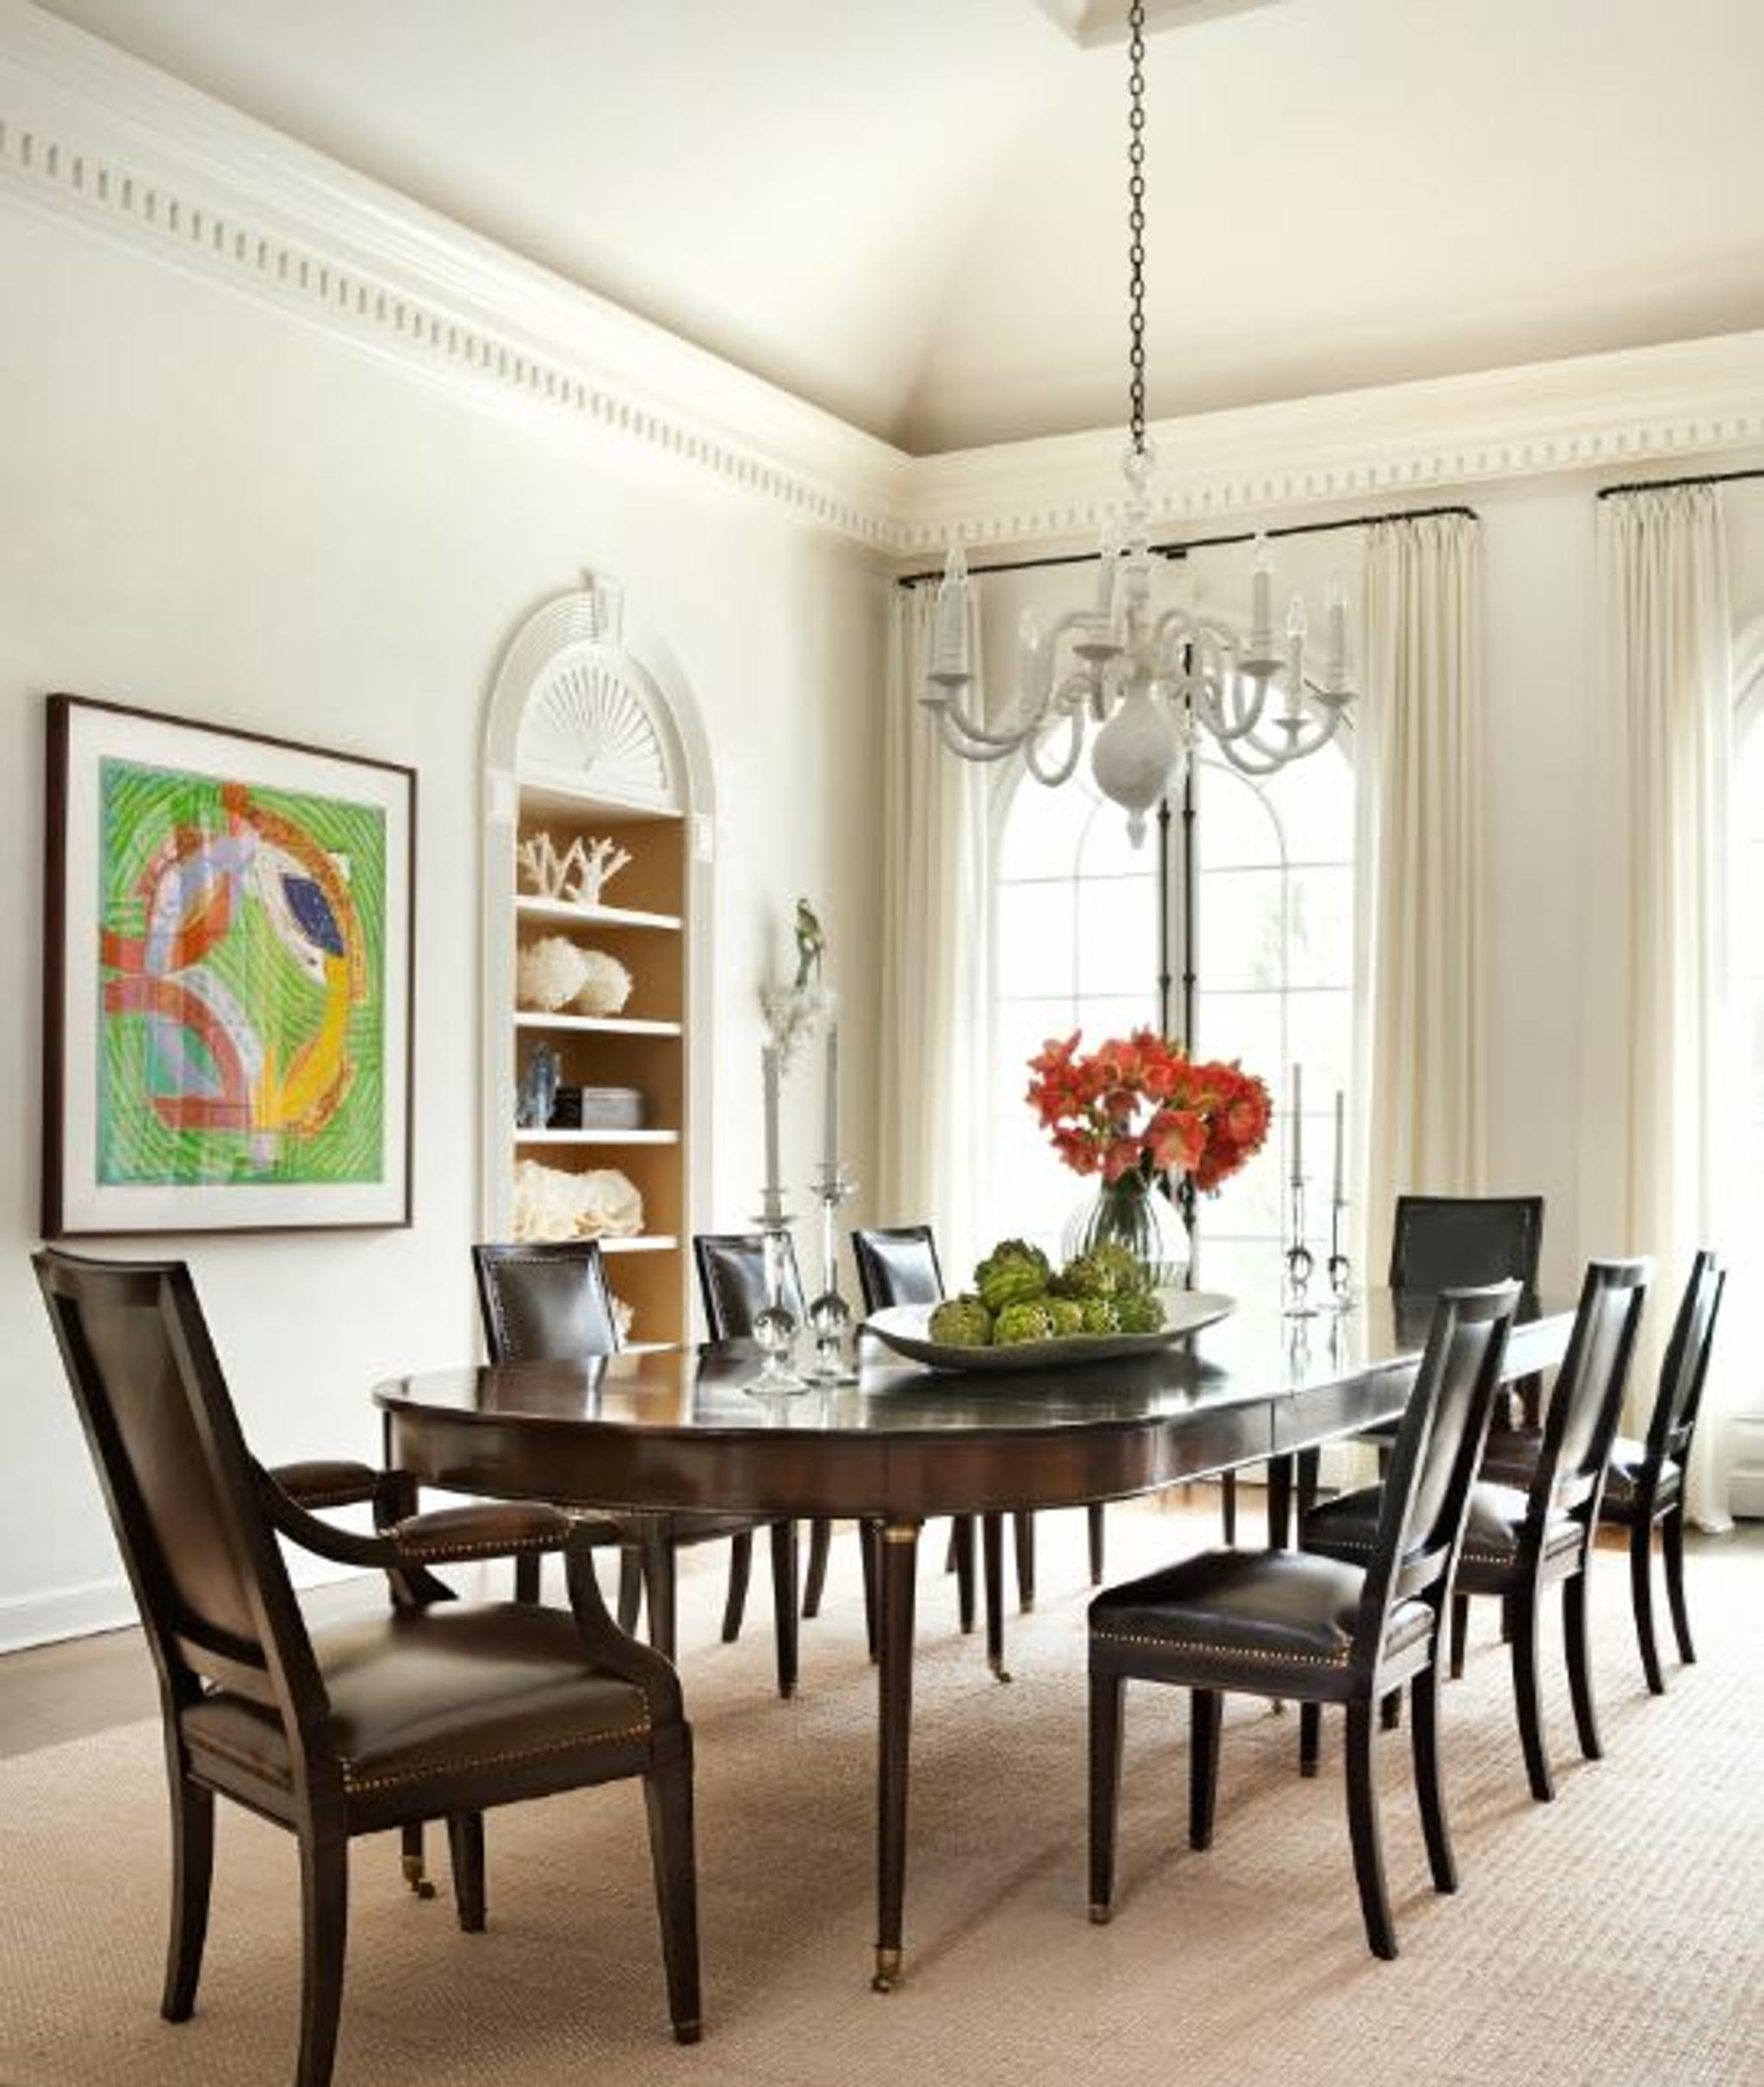 A richly polished antique dining table, and ebonized dining chair with black leather upholstery provides graphic contrast to the adjoining dining room, bathed in white, with white plaster dipped chandelier.